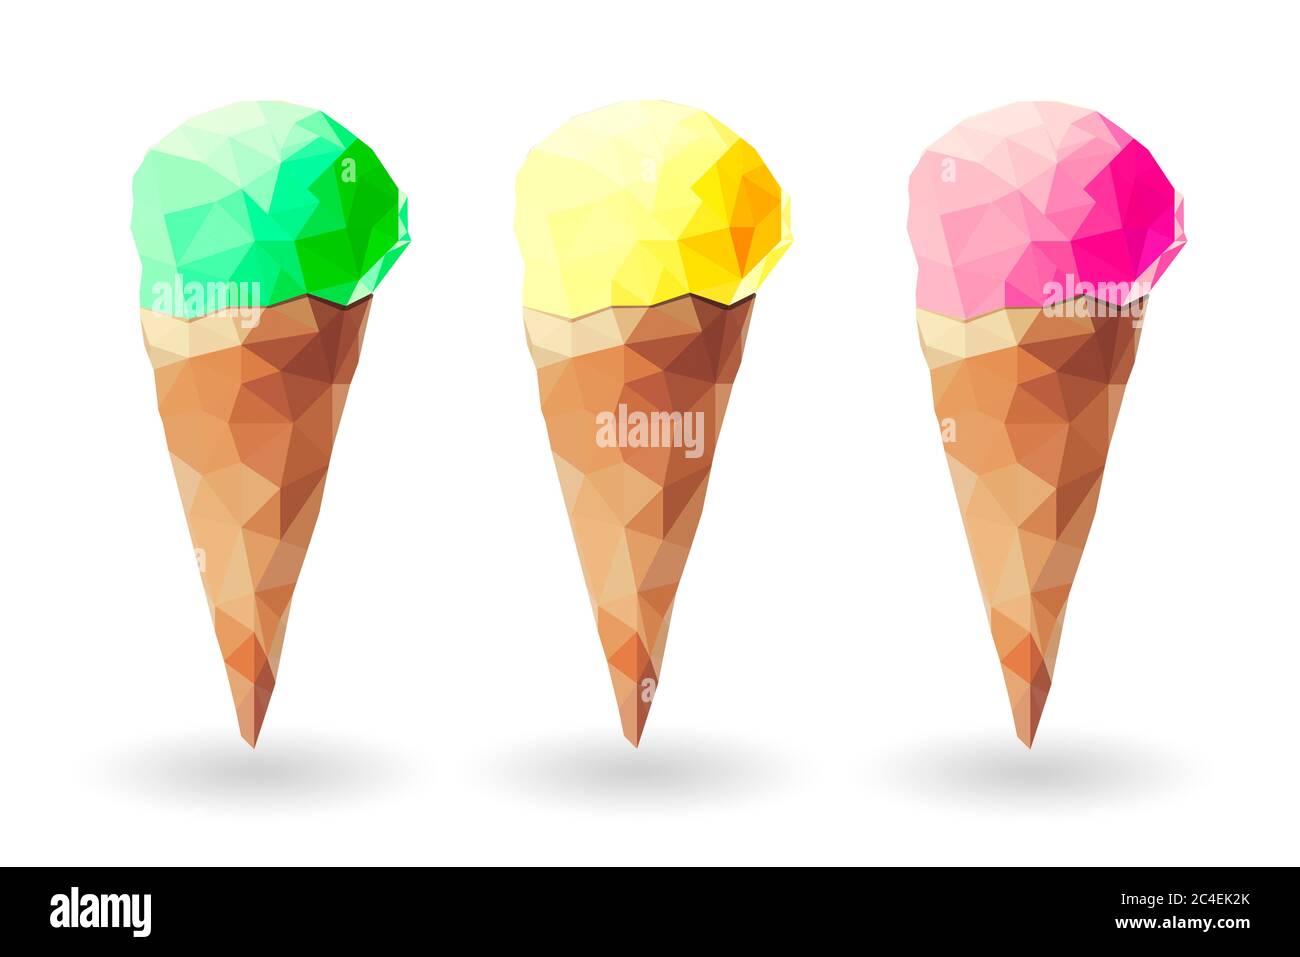 853 Mini Ice Cream Cone Images, Stock Photos, 3D objects